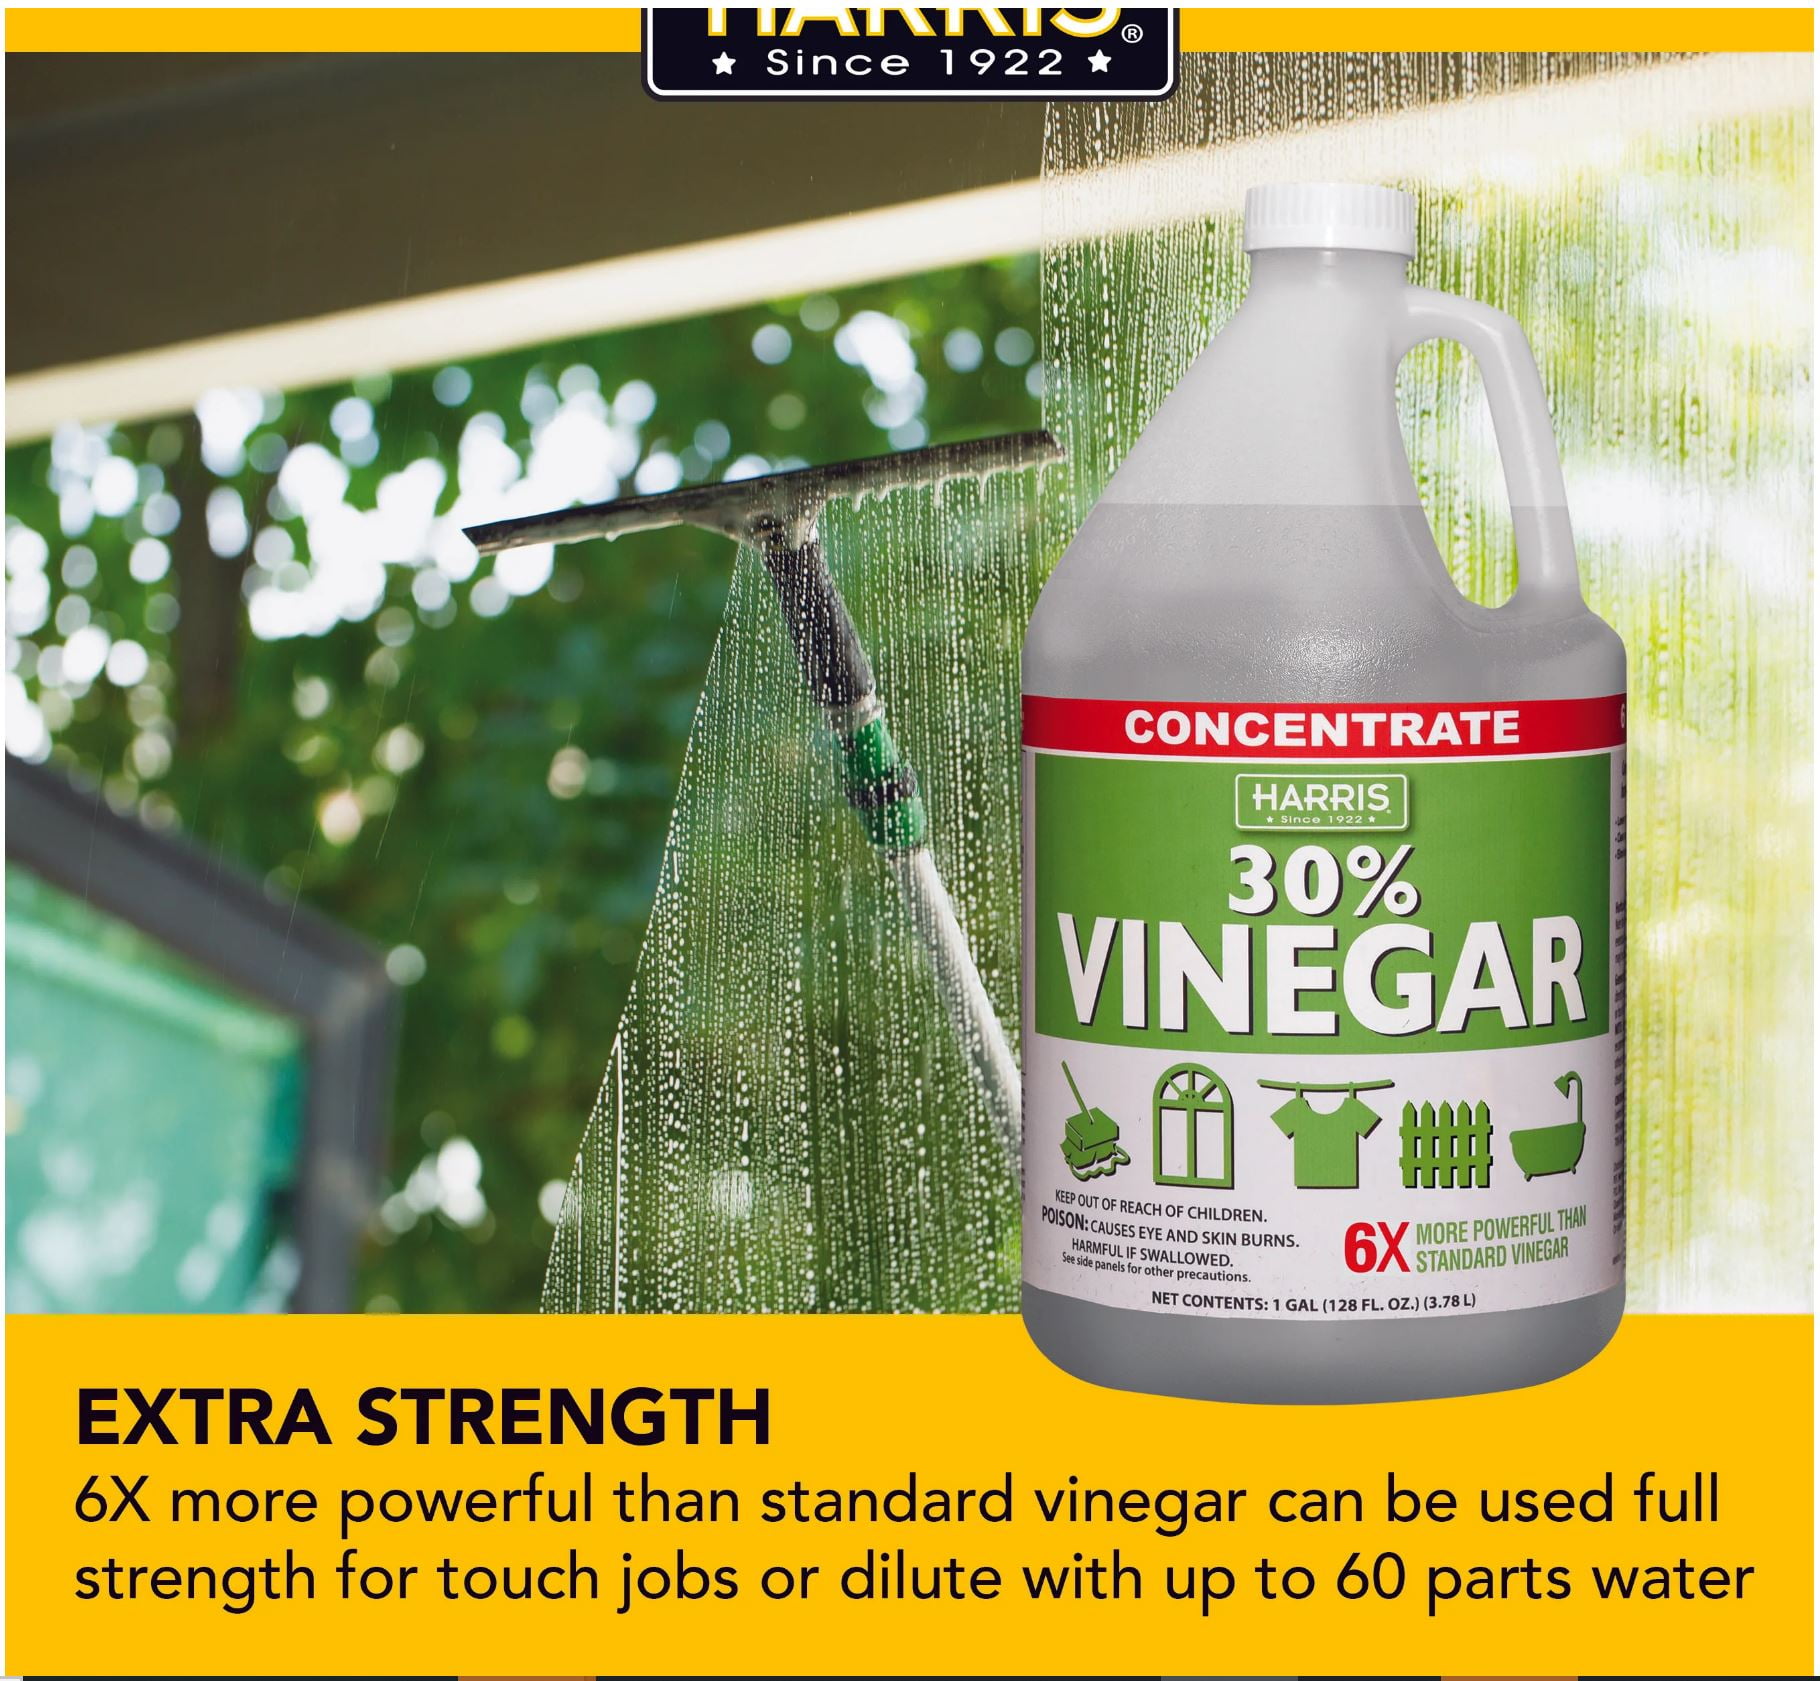 Stellar Chemical - 99% Pure Vinegar - 100% Natural Concentrated Cleaner -  Dilutes to 20 Gallons - 20x Power Vinegar - 1 Gallon